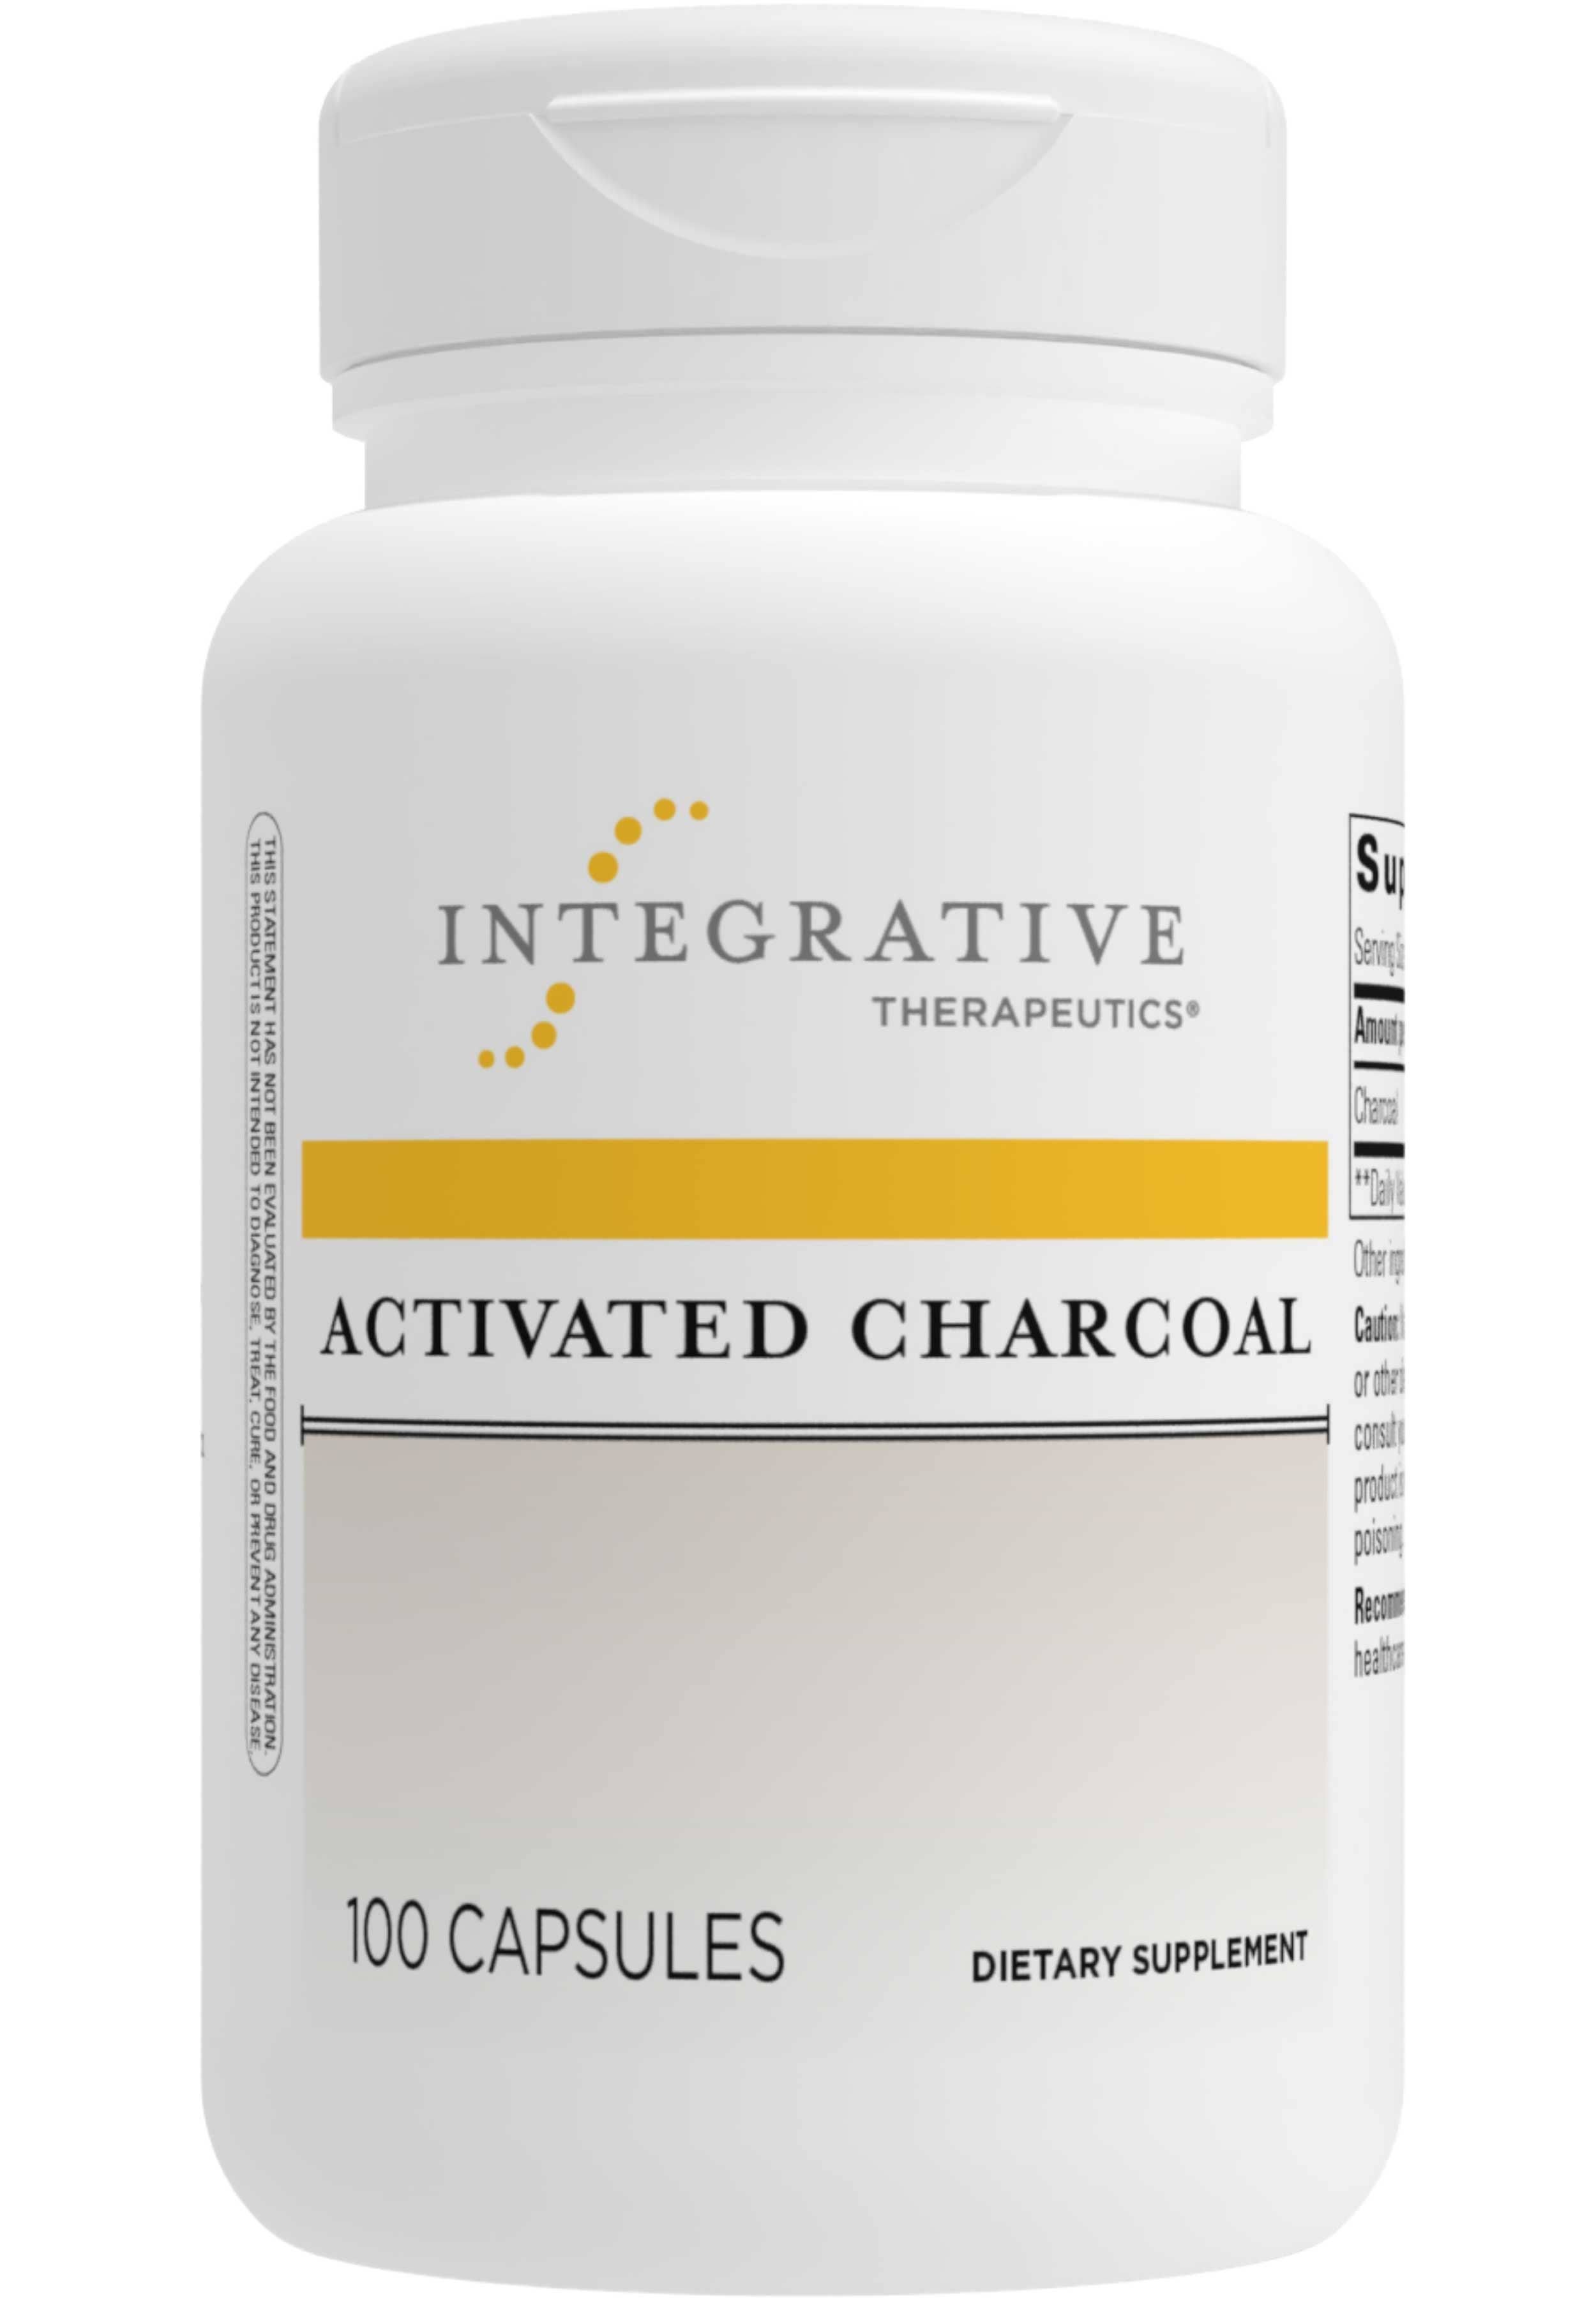 Integrative Therapeutics Activated Charcoal Dietary Supplement - 560mg, 100ct